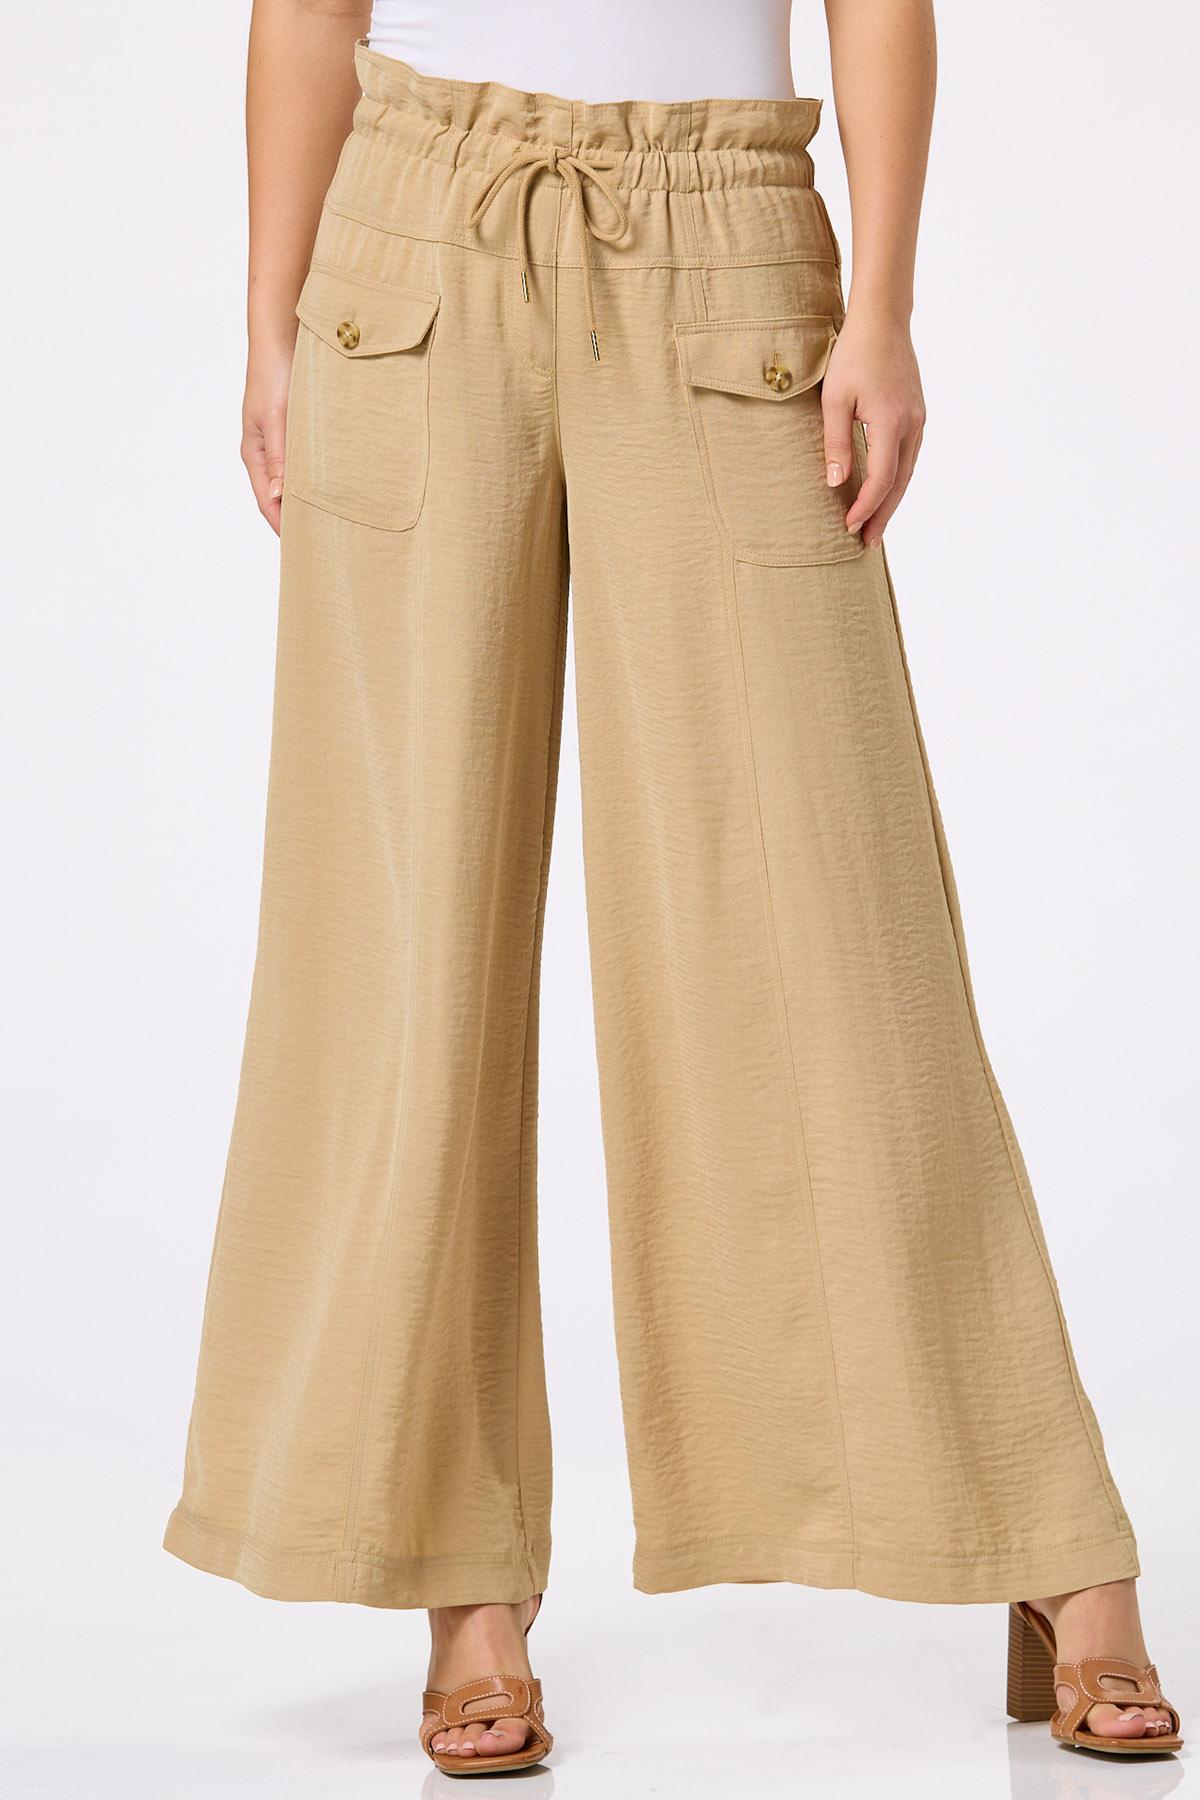 Cato Fashions  Cato Paperbag Waist Pants